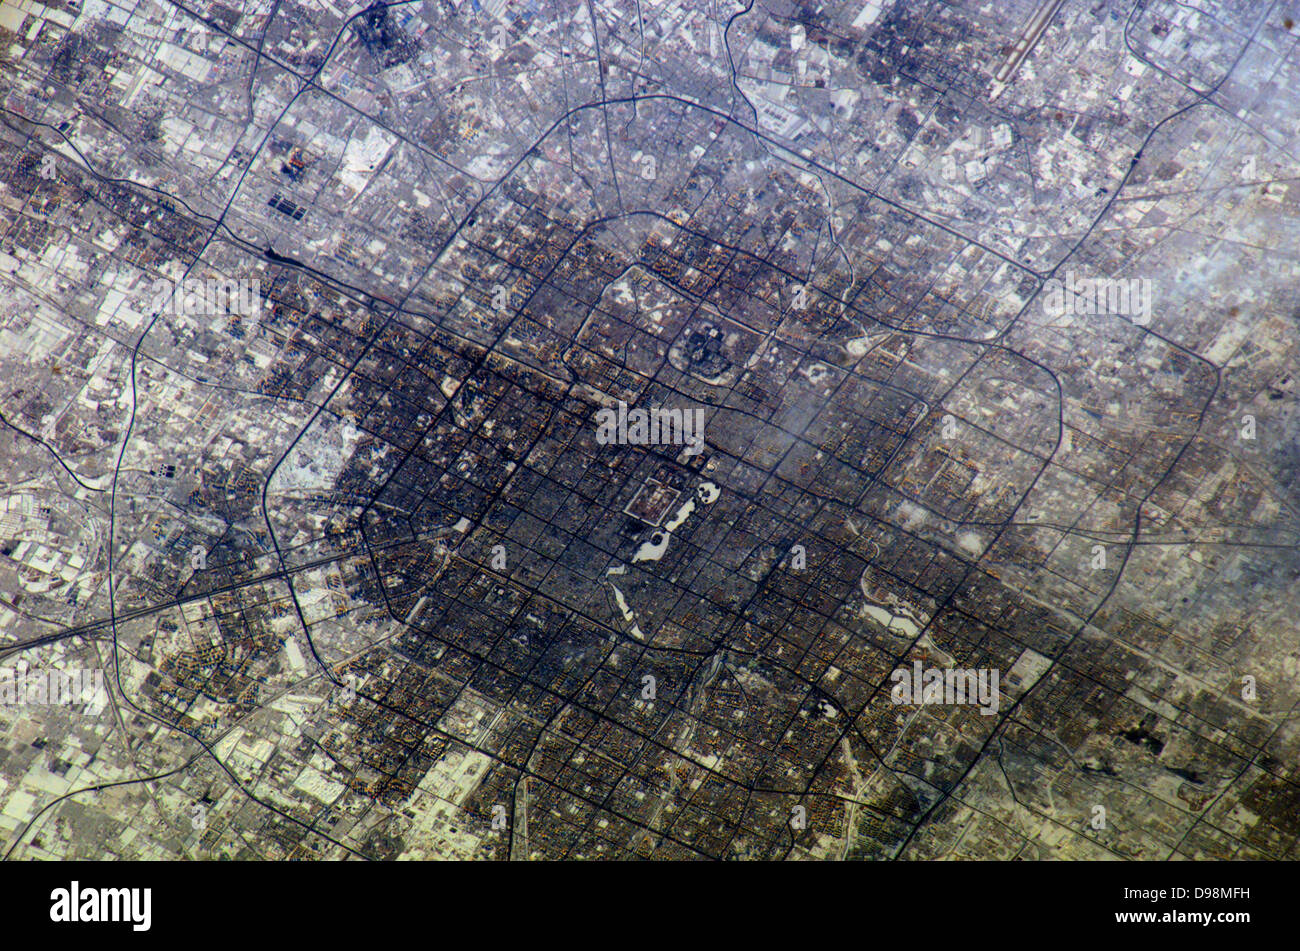 2005 The large city Beijing (Peking), China is featured in this image photographed by Expedition 10 Commander Leroy Chiao on the International Space Station. Stock Photo